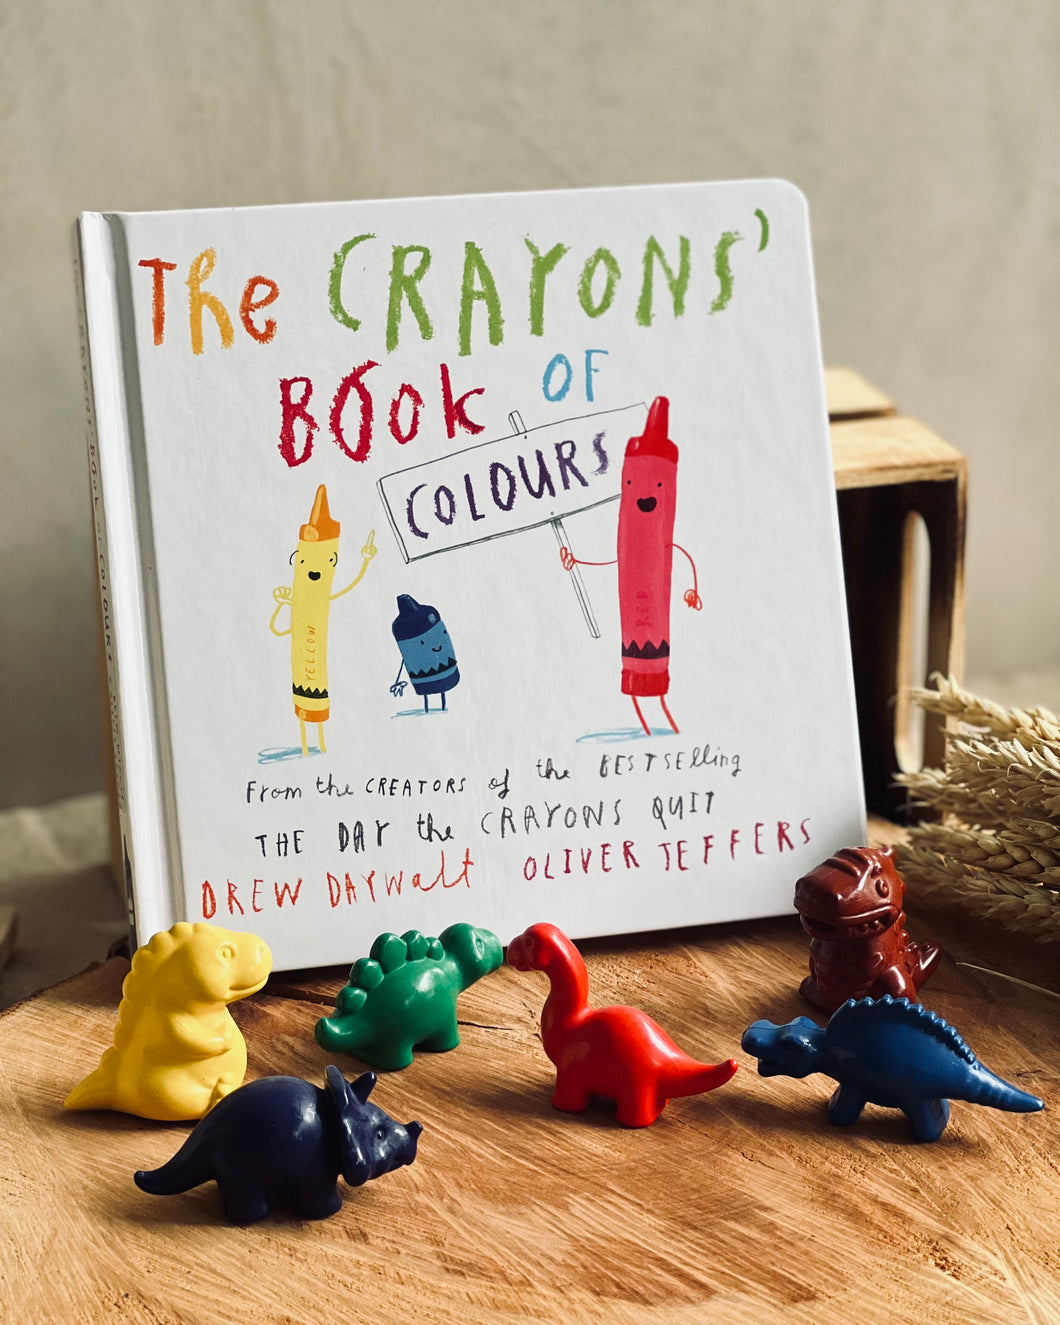 The Crayons Book of Colours